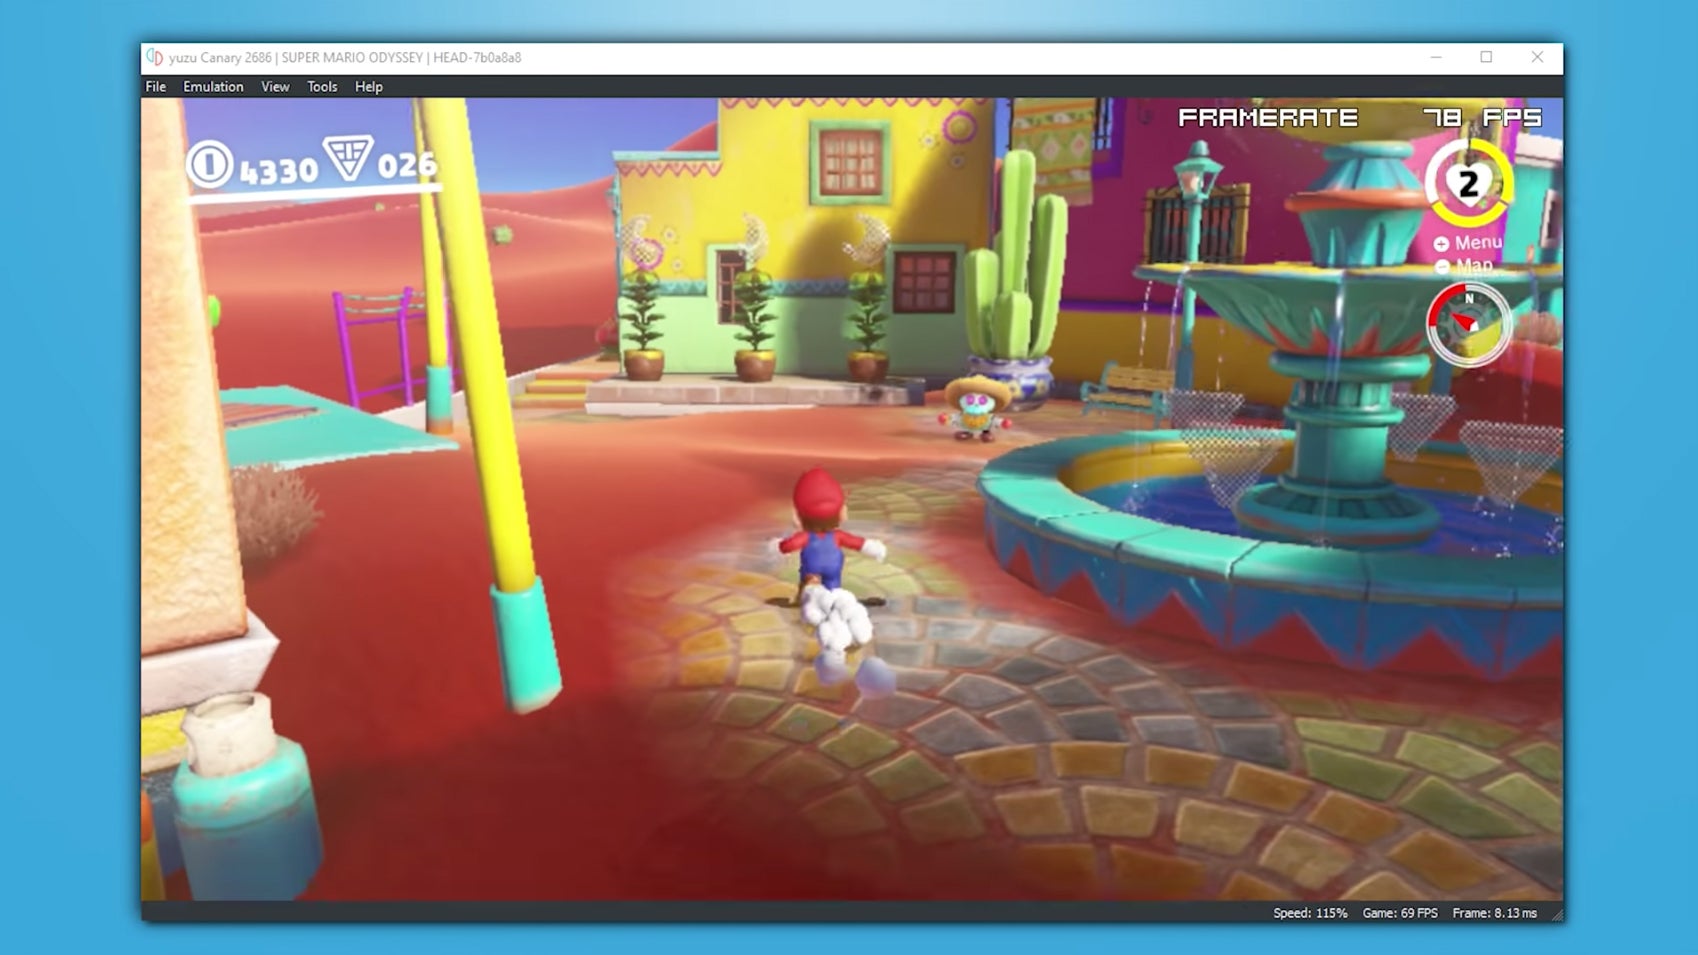 This Nintendo Switch Emulator For The PC Might Finally Be As Good As The Actual Console